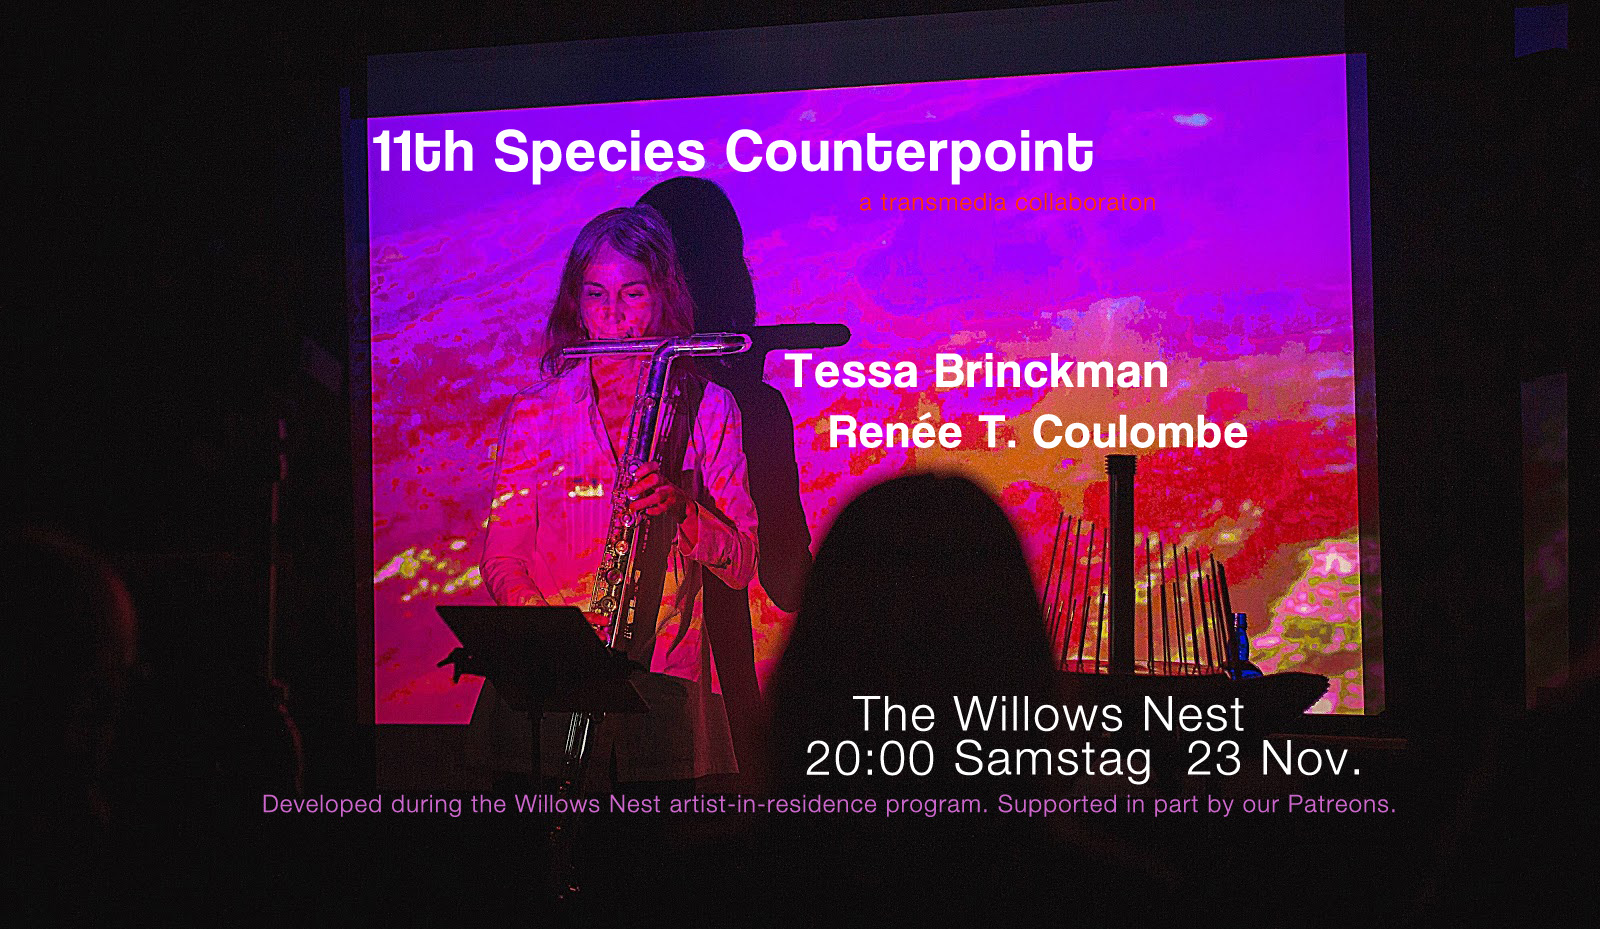 11th Species Counterpoint